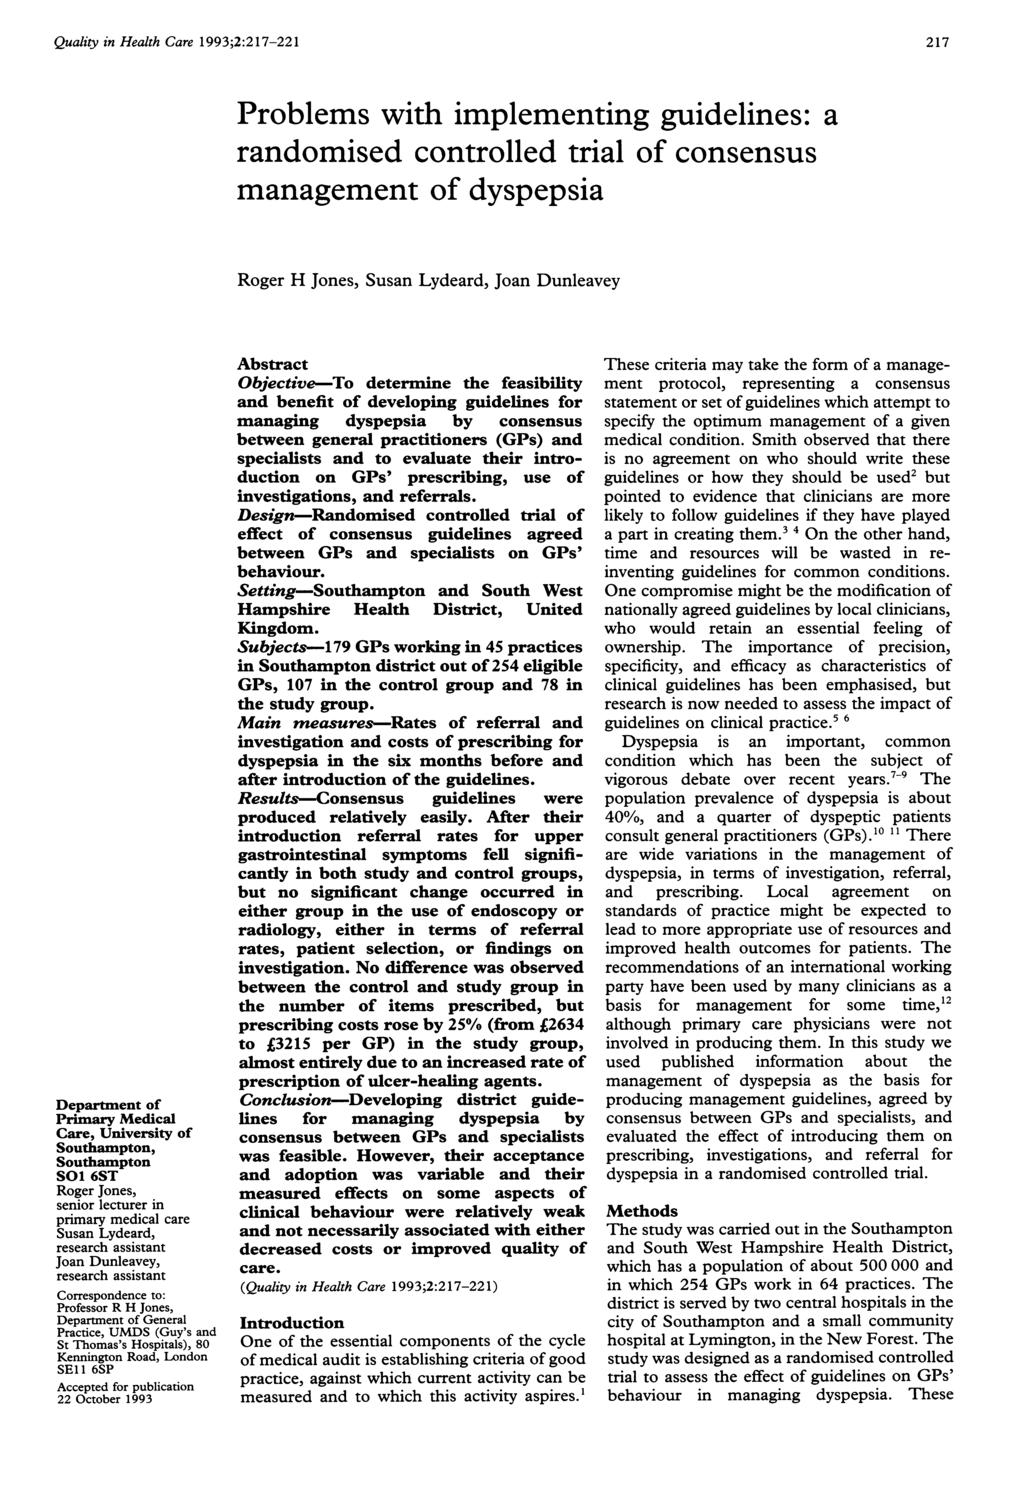 Quality in Health Care 1993;2:217-221 217 Department of Primary Medical Care, University of Southampton, Southampton S01 6ST Roger Jones, senior lecturer in primary medical care Susan Lydeard,